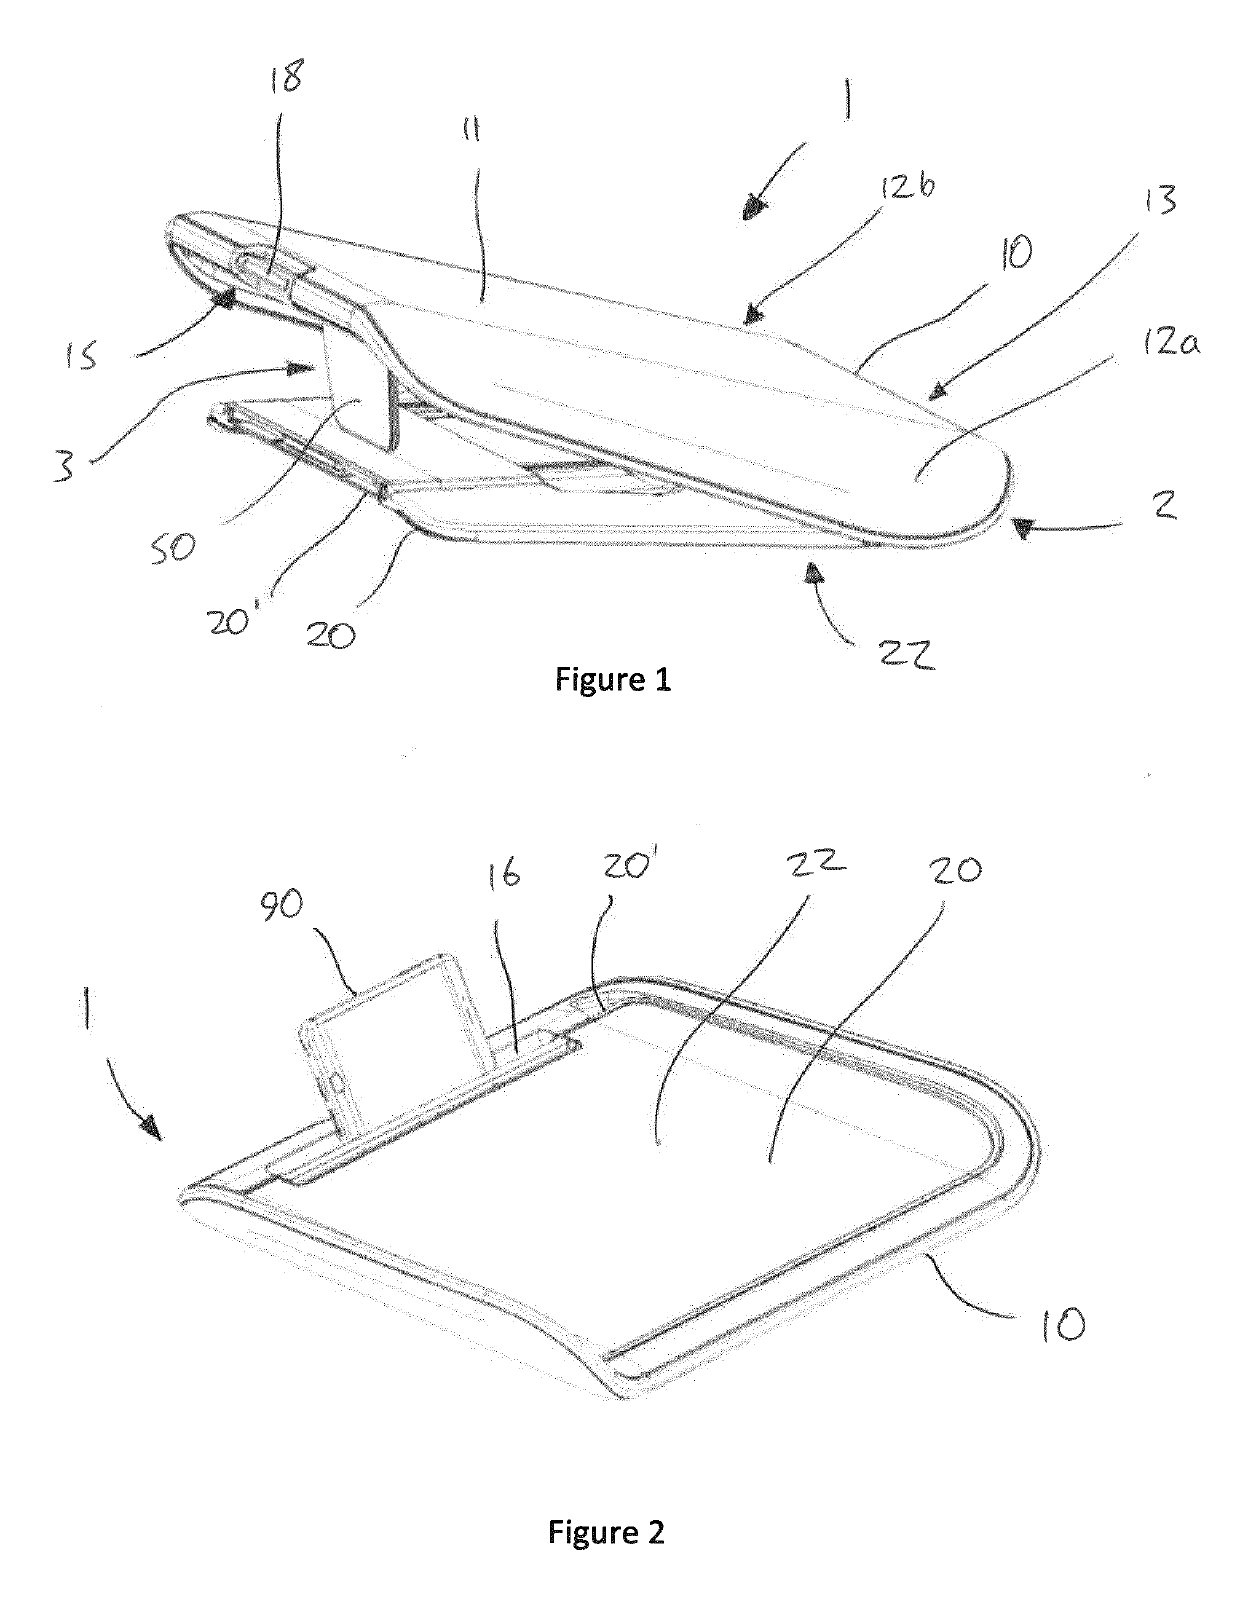 Portable table attachable and detachable from the interior trim of a vehicle